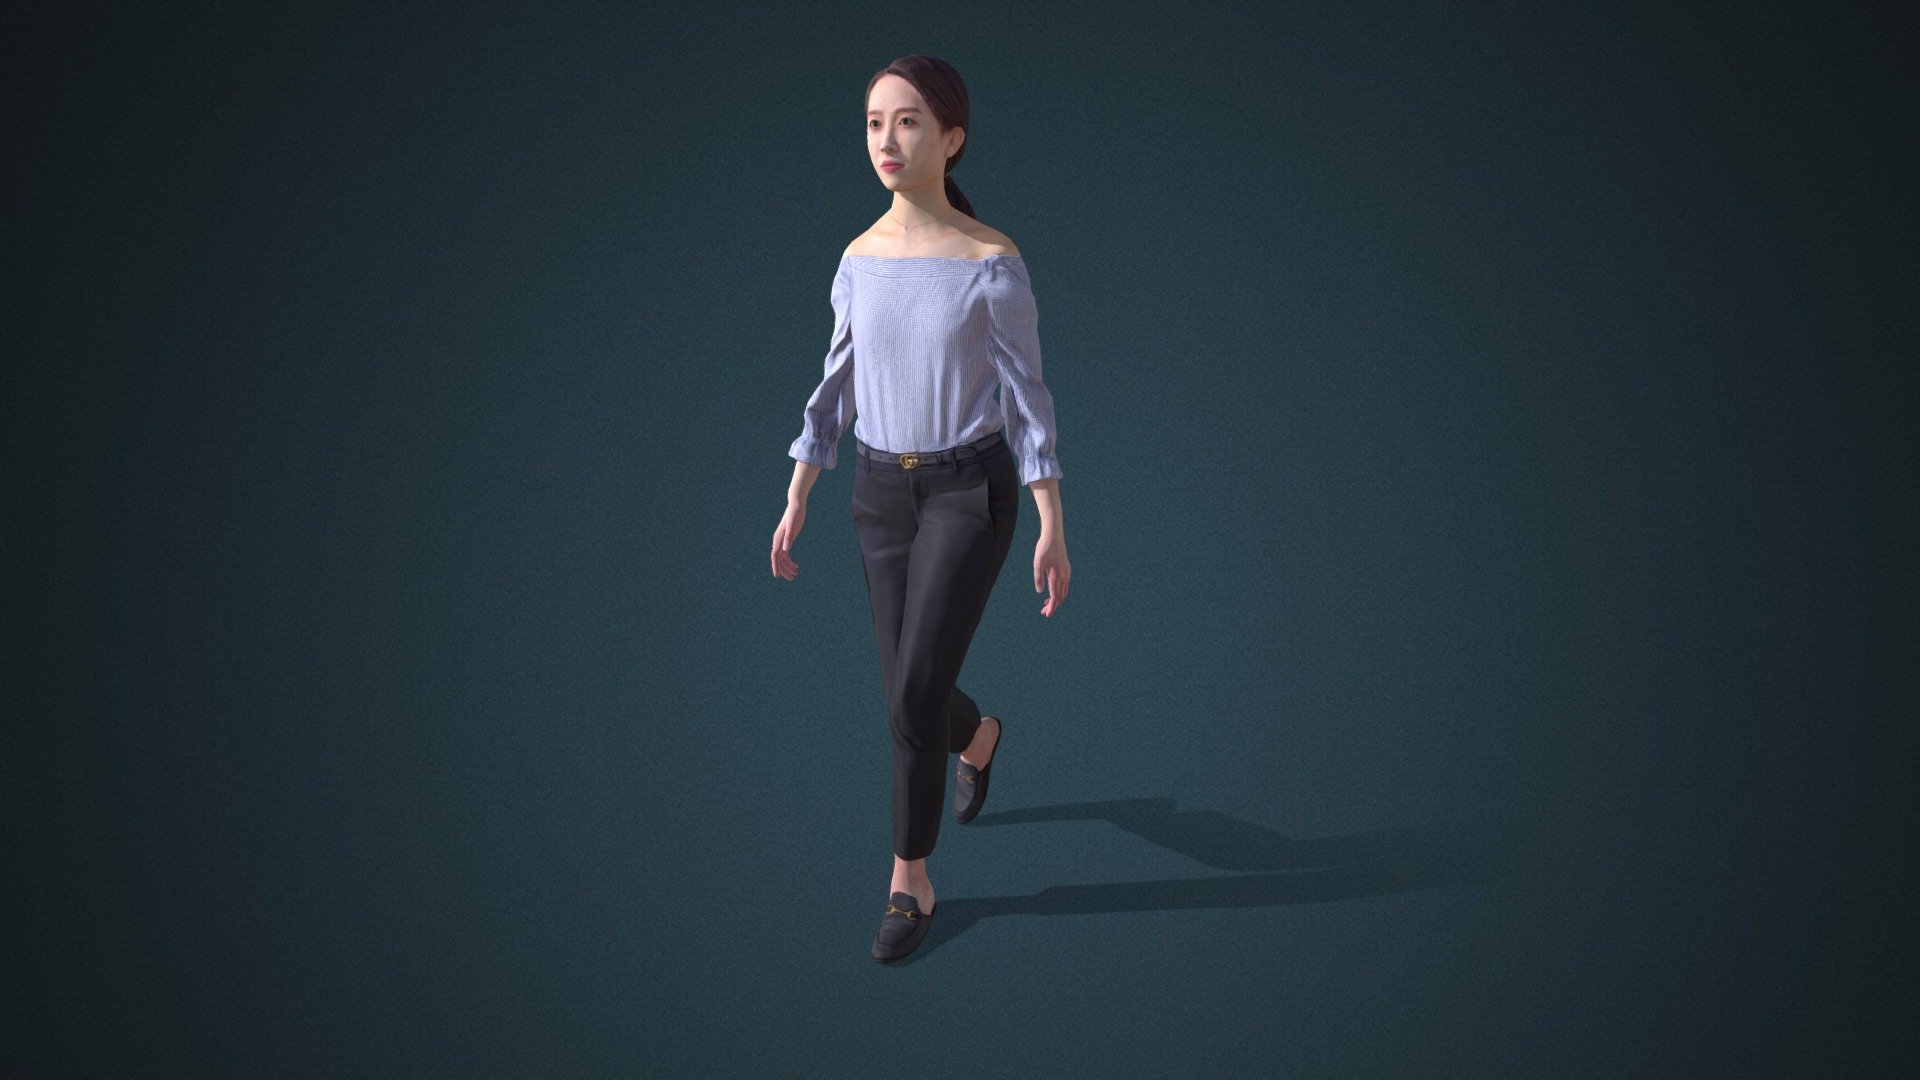 Do you like this model?  Free Download more models, motions and auto rigging tool AccuRIG (Value: $150+) on ActorCore
 

This model includes 2 mocap animations:  Modern_F_Look around,Modern_F_Walk. Get more free motions

Design for high-performance crowd animation.

Buy full pack and Save 20%+: Street People Vol.2


SPECIFICATIONS

✔ Geometry : 7K~10K Quads, one mesh

✔ Material : One material with changeable colors.

✔ Texture Resolution : 4K

✔ Shader : PBR, Diffuse, Normal, Roughness, Metallic, Opacity

✔ Rigged : Facial and Body (shoulders, fingers, toes, eyeballs, jaw)

✔ Blendshape : 122 for facial expressions and lipsync

✔ Compatible with iClone AccuLips, Facial ExPlus, and traditional lip-sync.


About Reallusion ActorCore

ActorCore offers the highest quality 3D asset libraries for mocap motions and animated 3D humans for crowd rendering 3d model